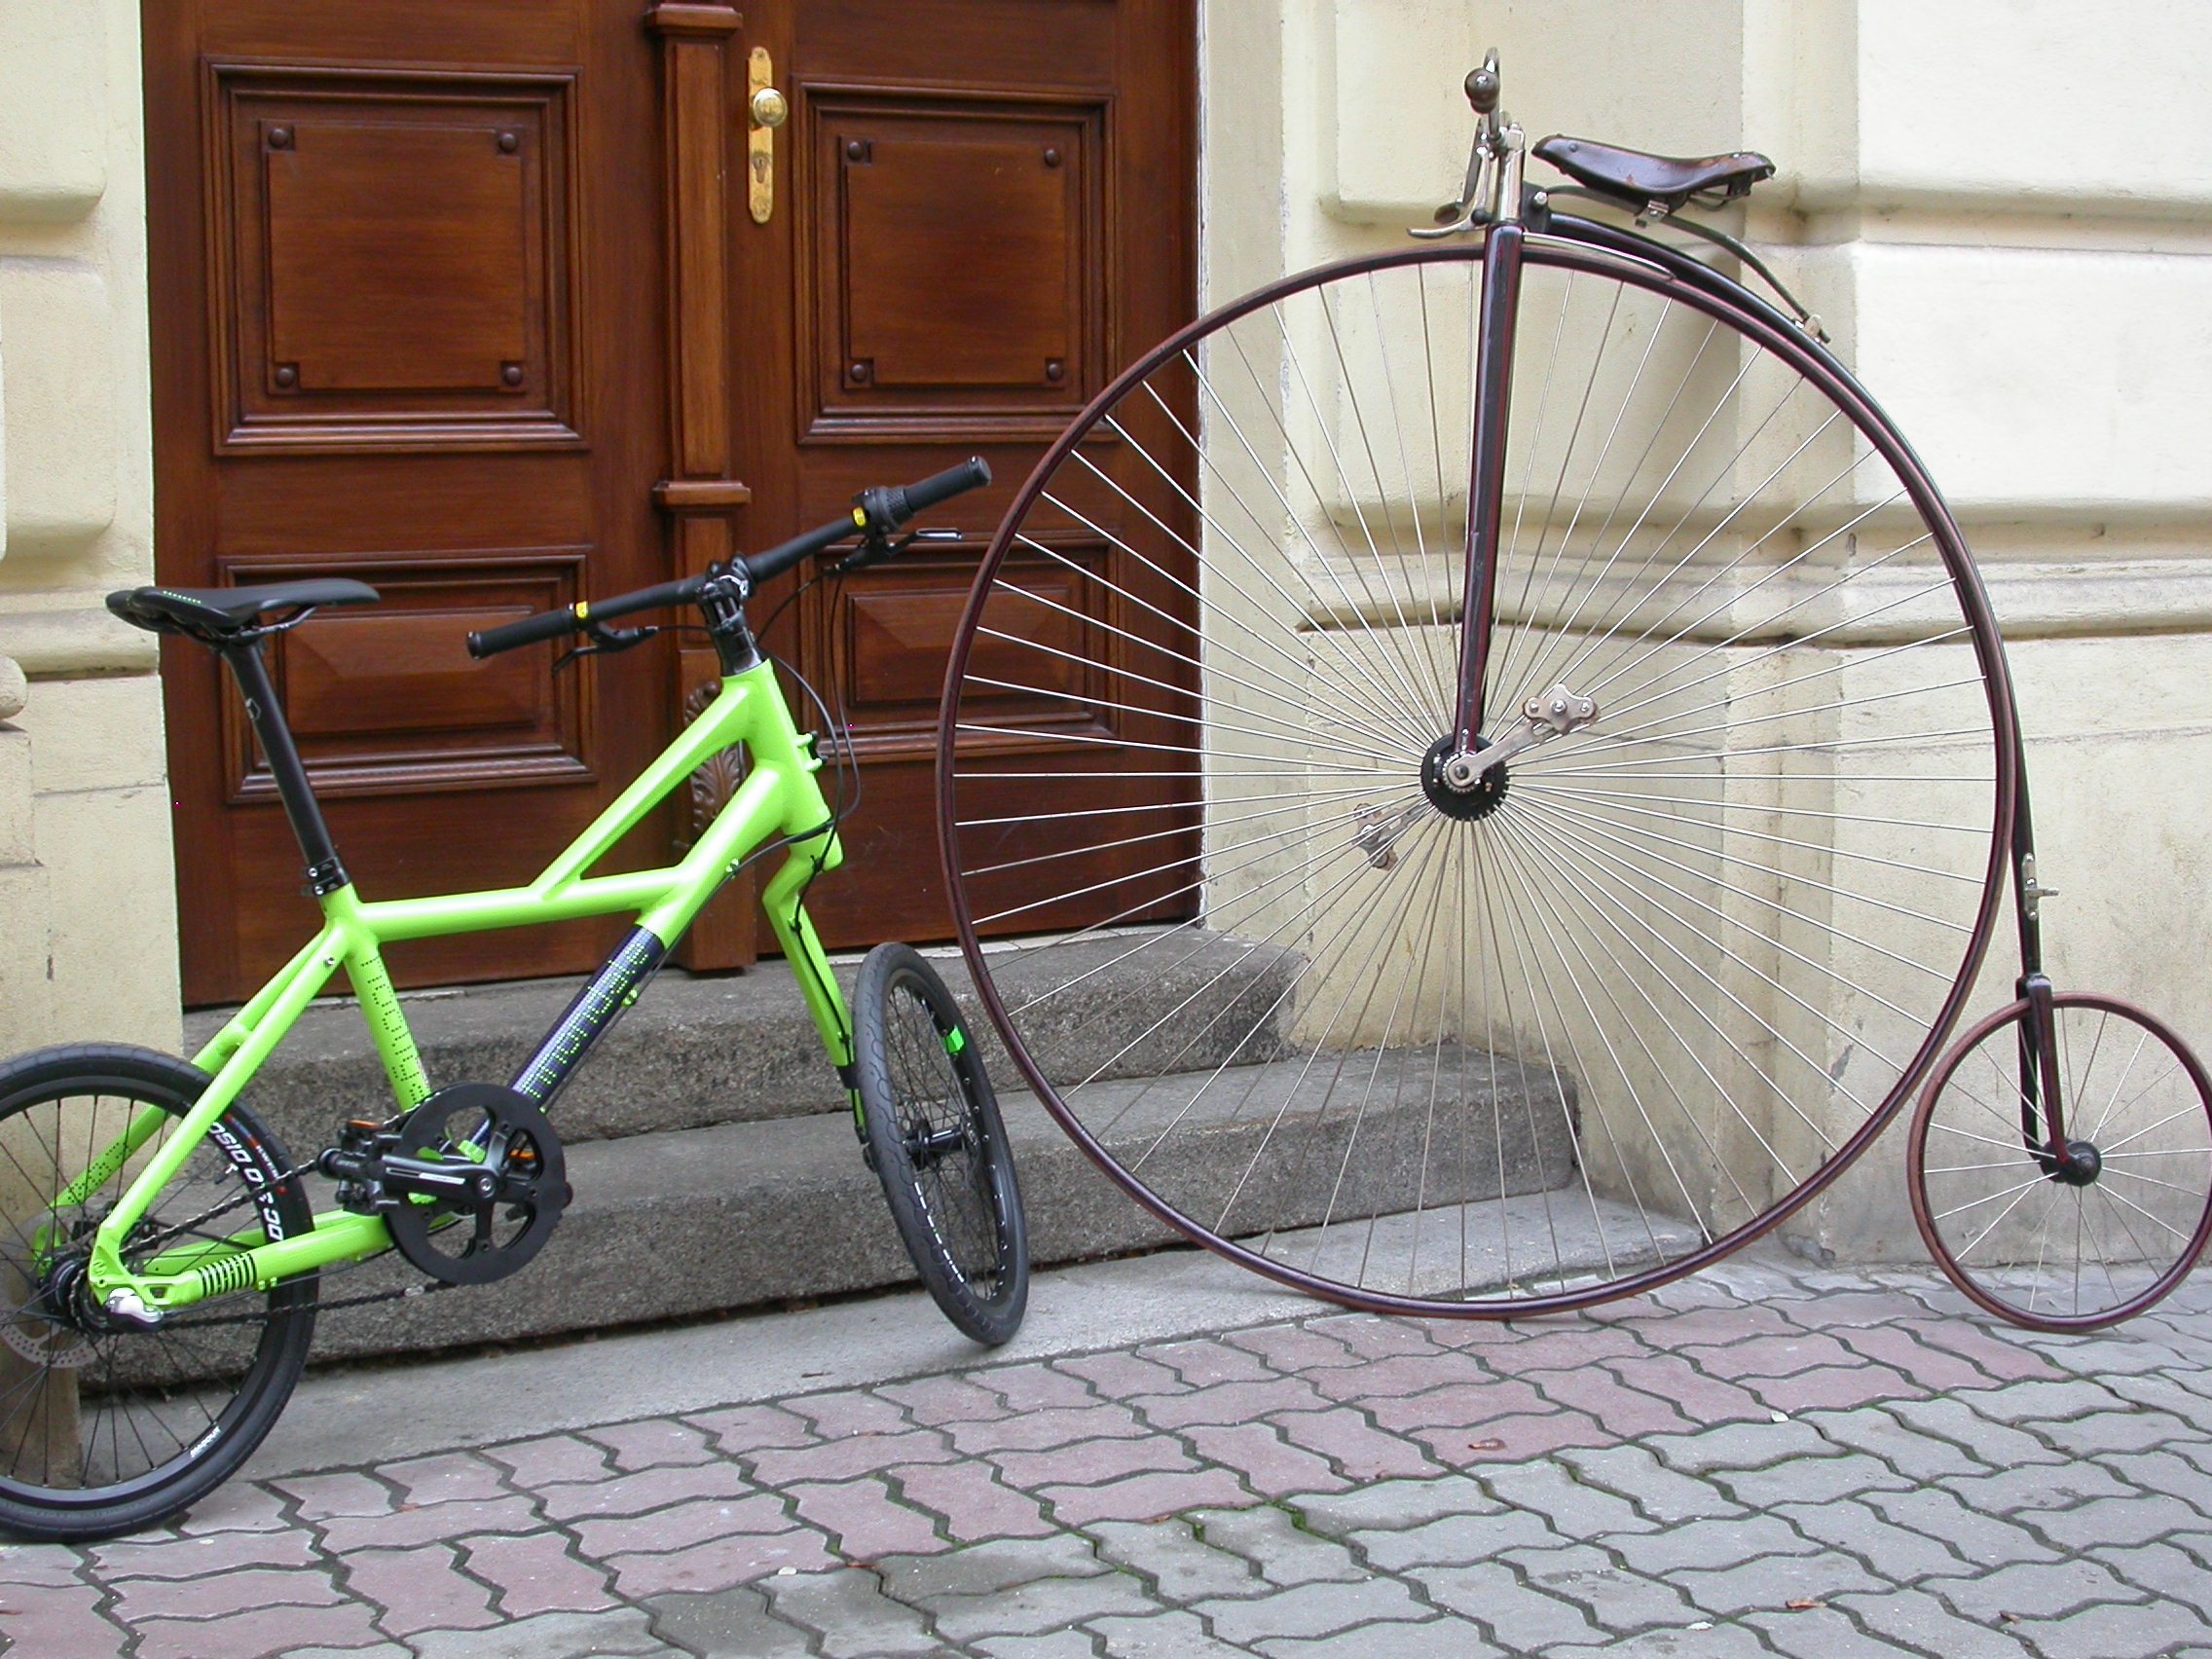 Cannondale Hooligan (2012) vs. Coventry Machinists Co. Ordinary bike (1886)